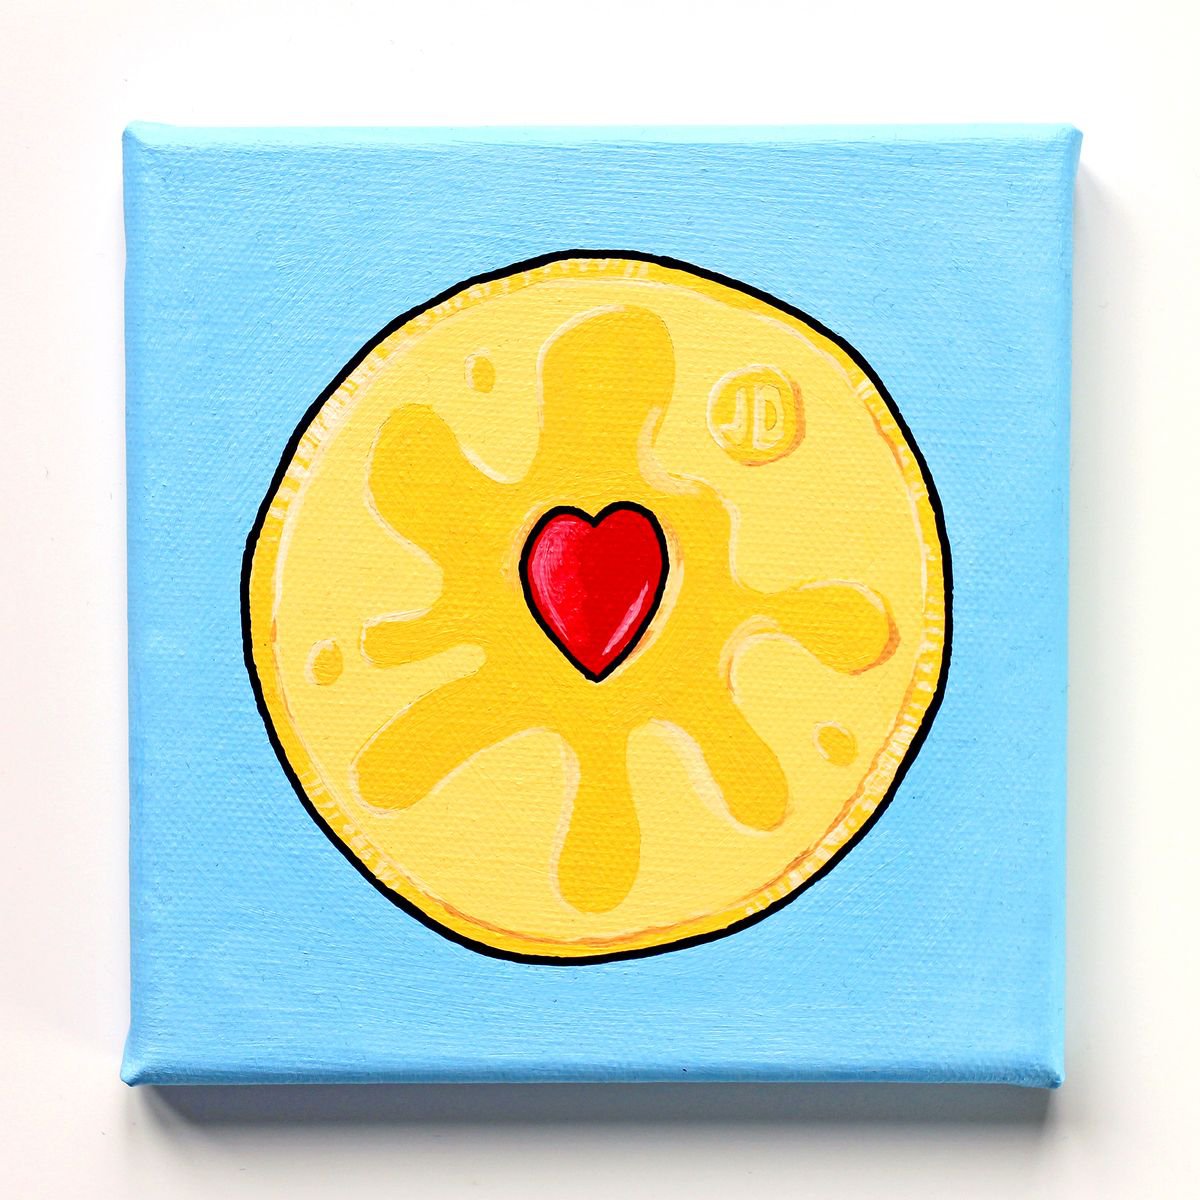 Jammy Dodger Biscuit Pop Art Painting on Miniature Canvas by Ian Viggars